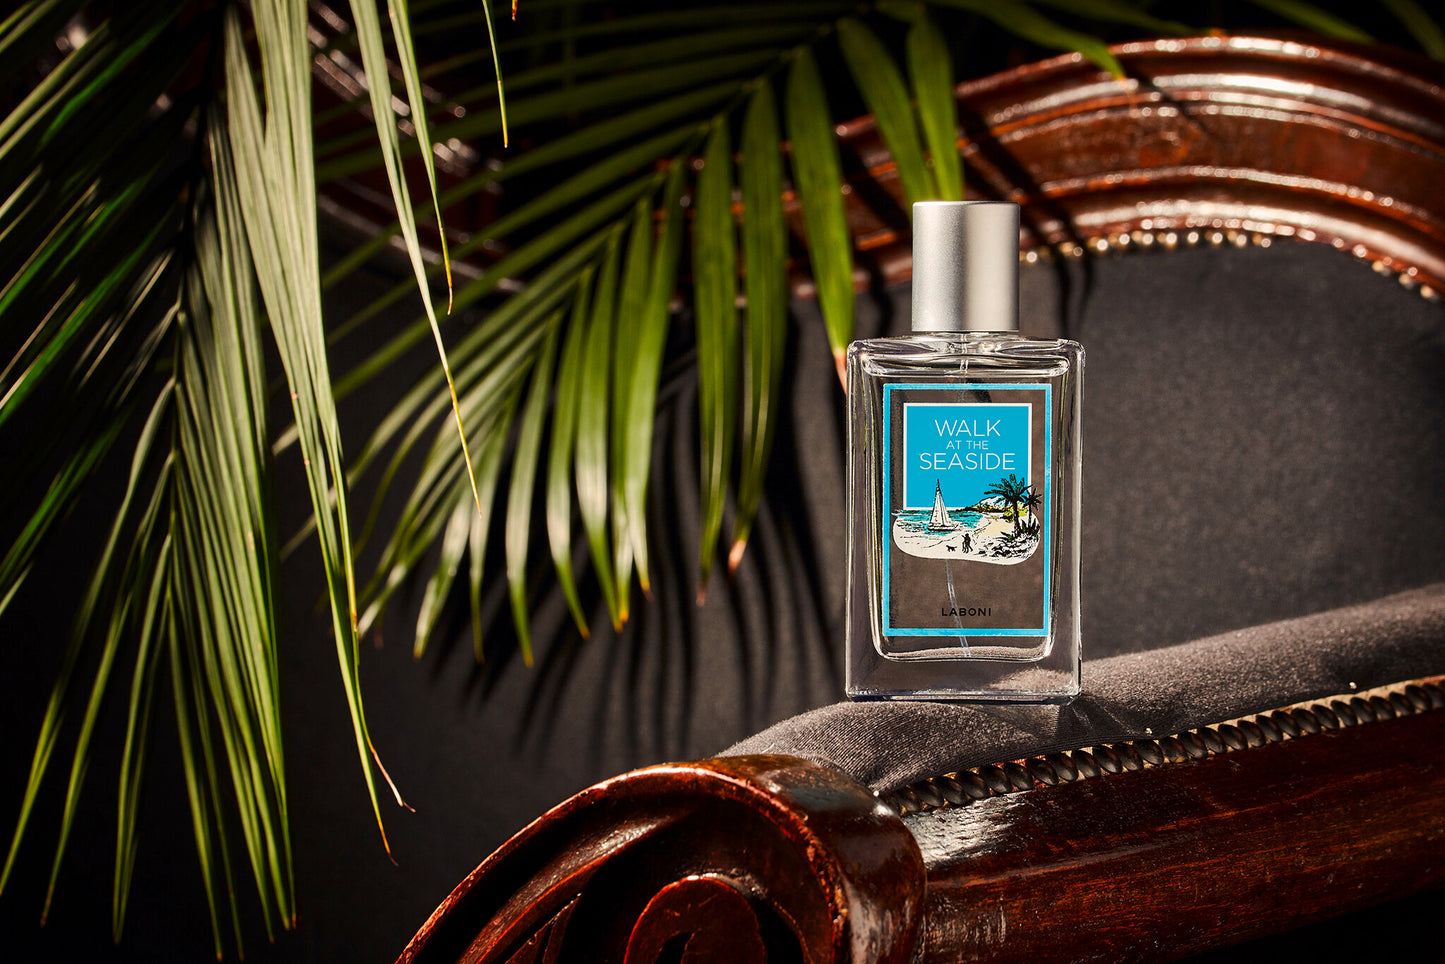 Scent "Walk at the Seaside"